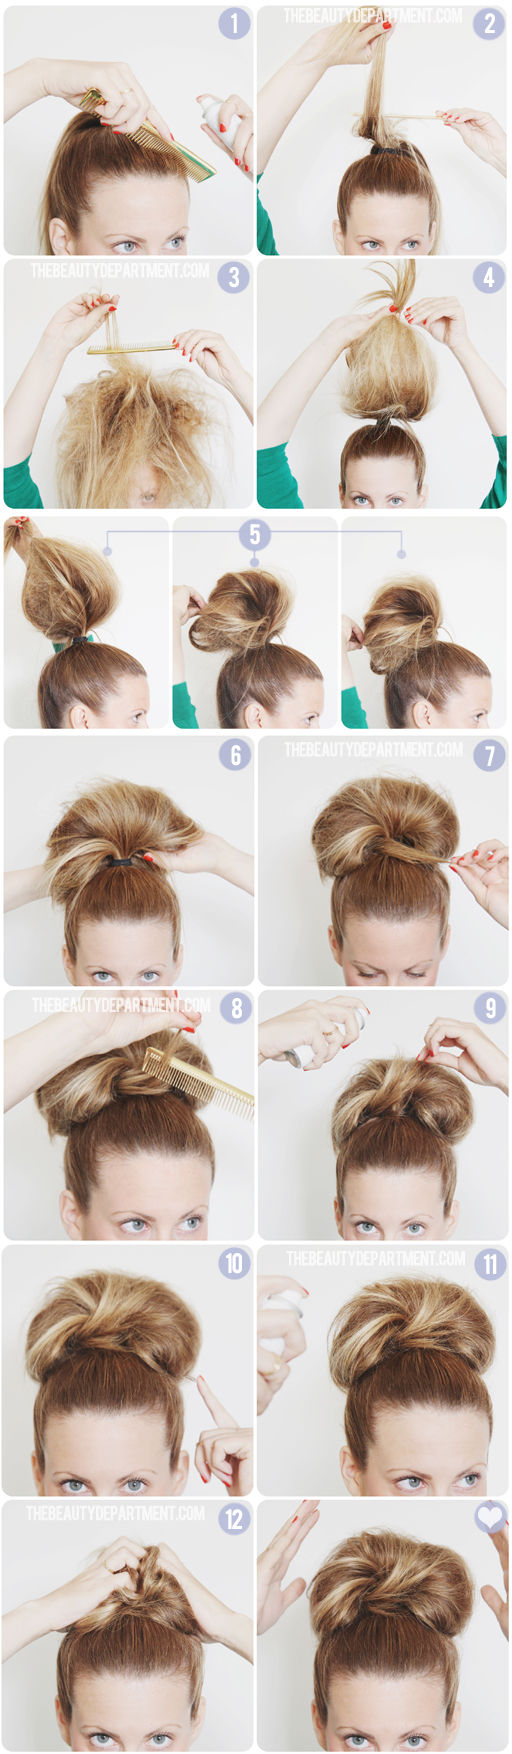 18 Great Hairstyle Ideas and Tutorials for Perfect Holiday Look (15)